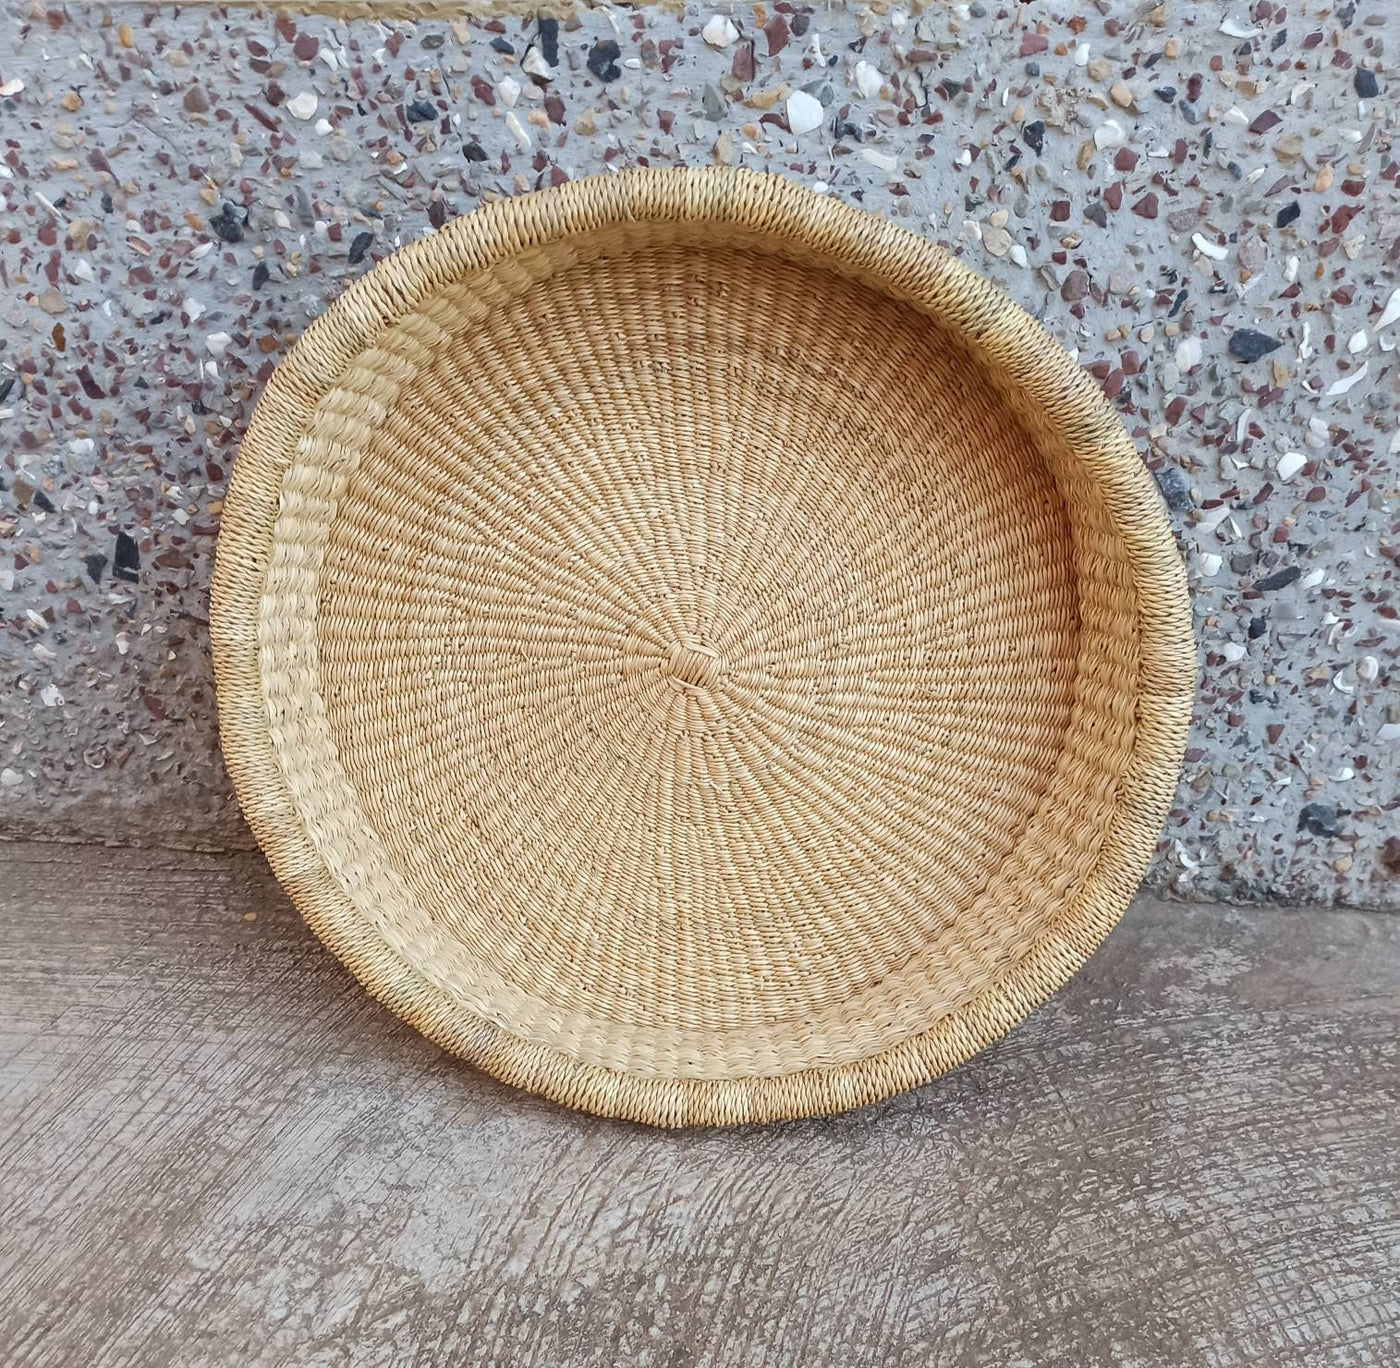 Fruit basket| Wall Basket | Fruit bowl | Tray basket | Tray decor | Tray for table | African handmade serving tray  | Kitchen tray - AfricanheritageGH